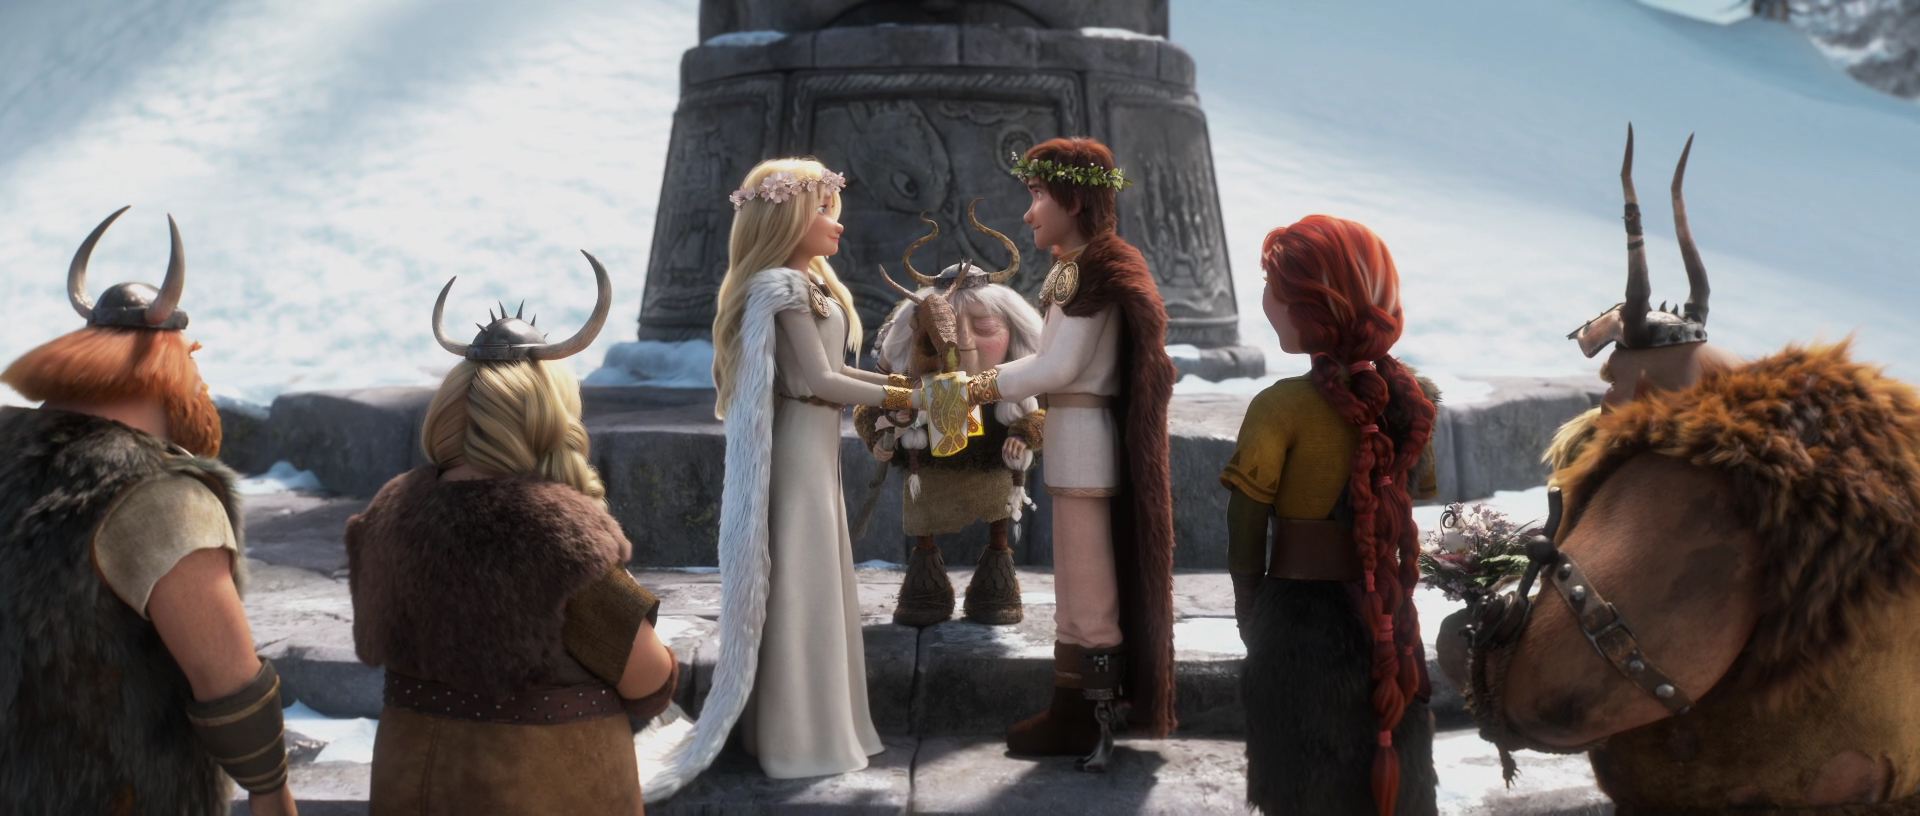 Dragons Astrid X Hicks Porn - Astrid and Hiccup's Relationship | How to Train Your Dragon Wiki ...